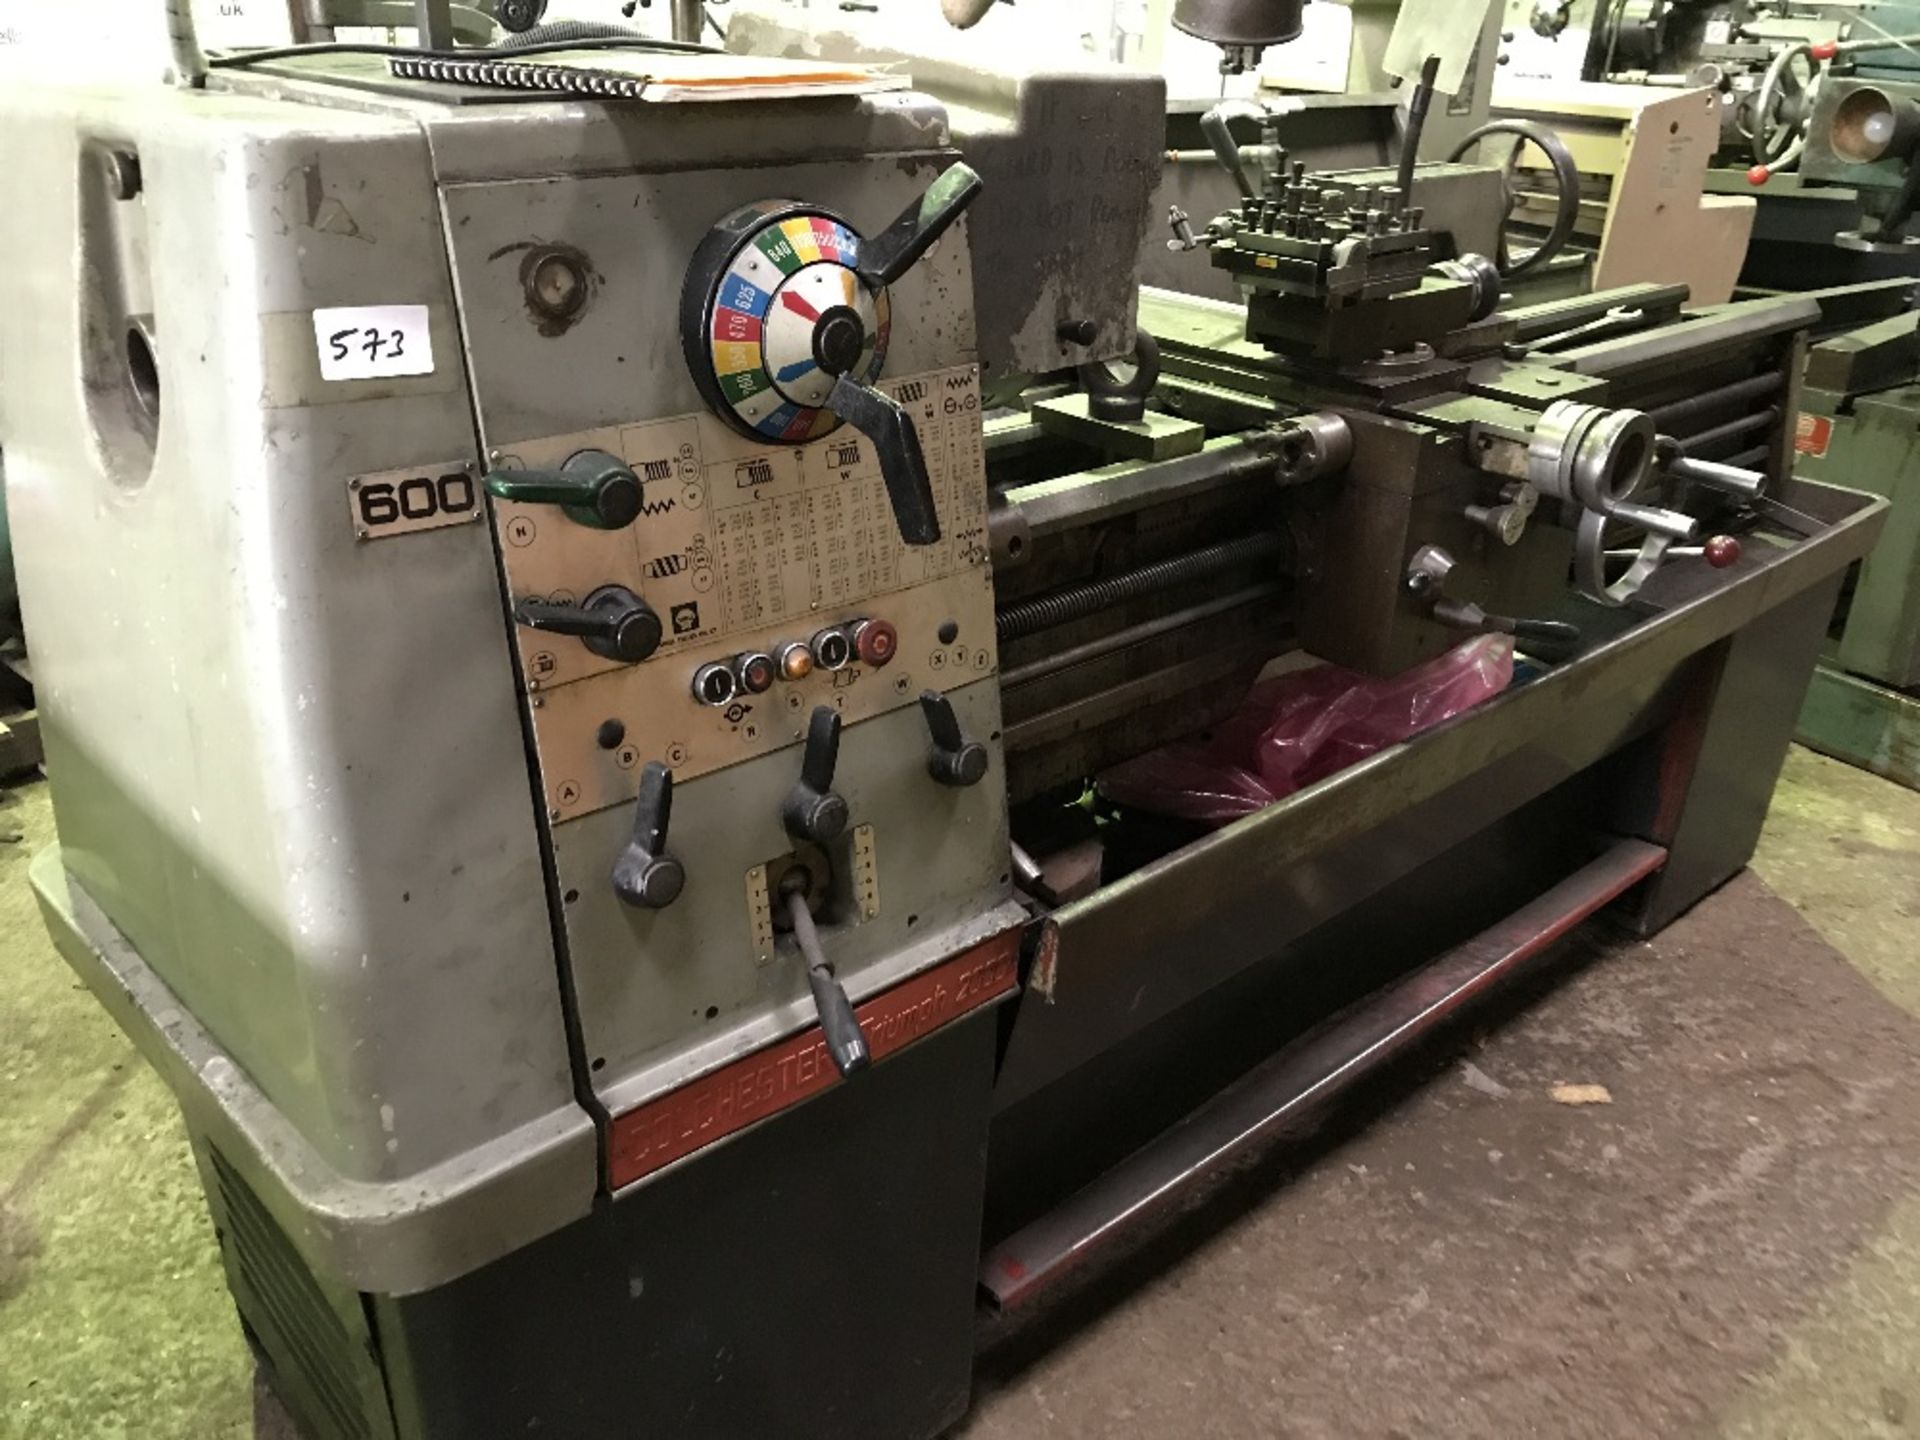 COLCHESTER TRIUMPH 2000 LATHE 600 MODEL C/W TOOLING AS SHOWN AND INCLUDES MITUTOYO KA COUNTER